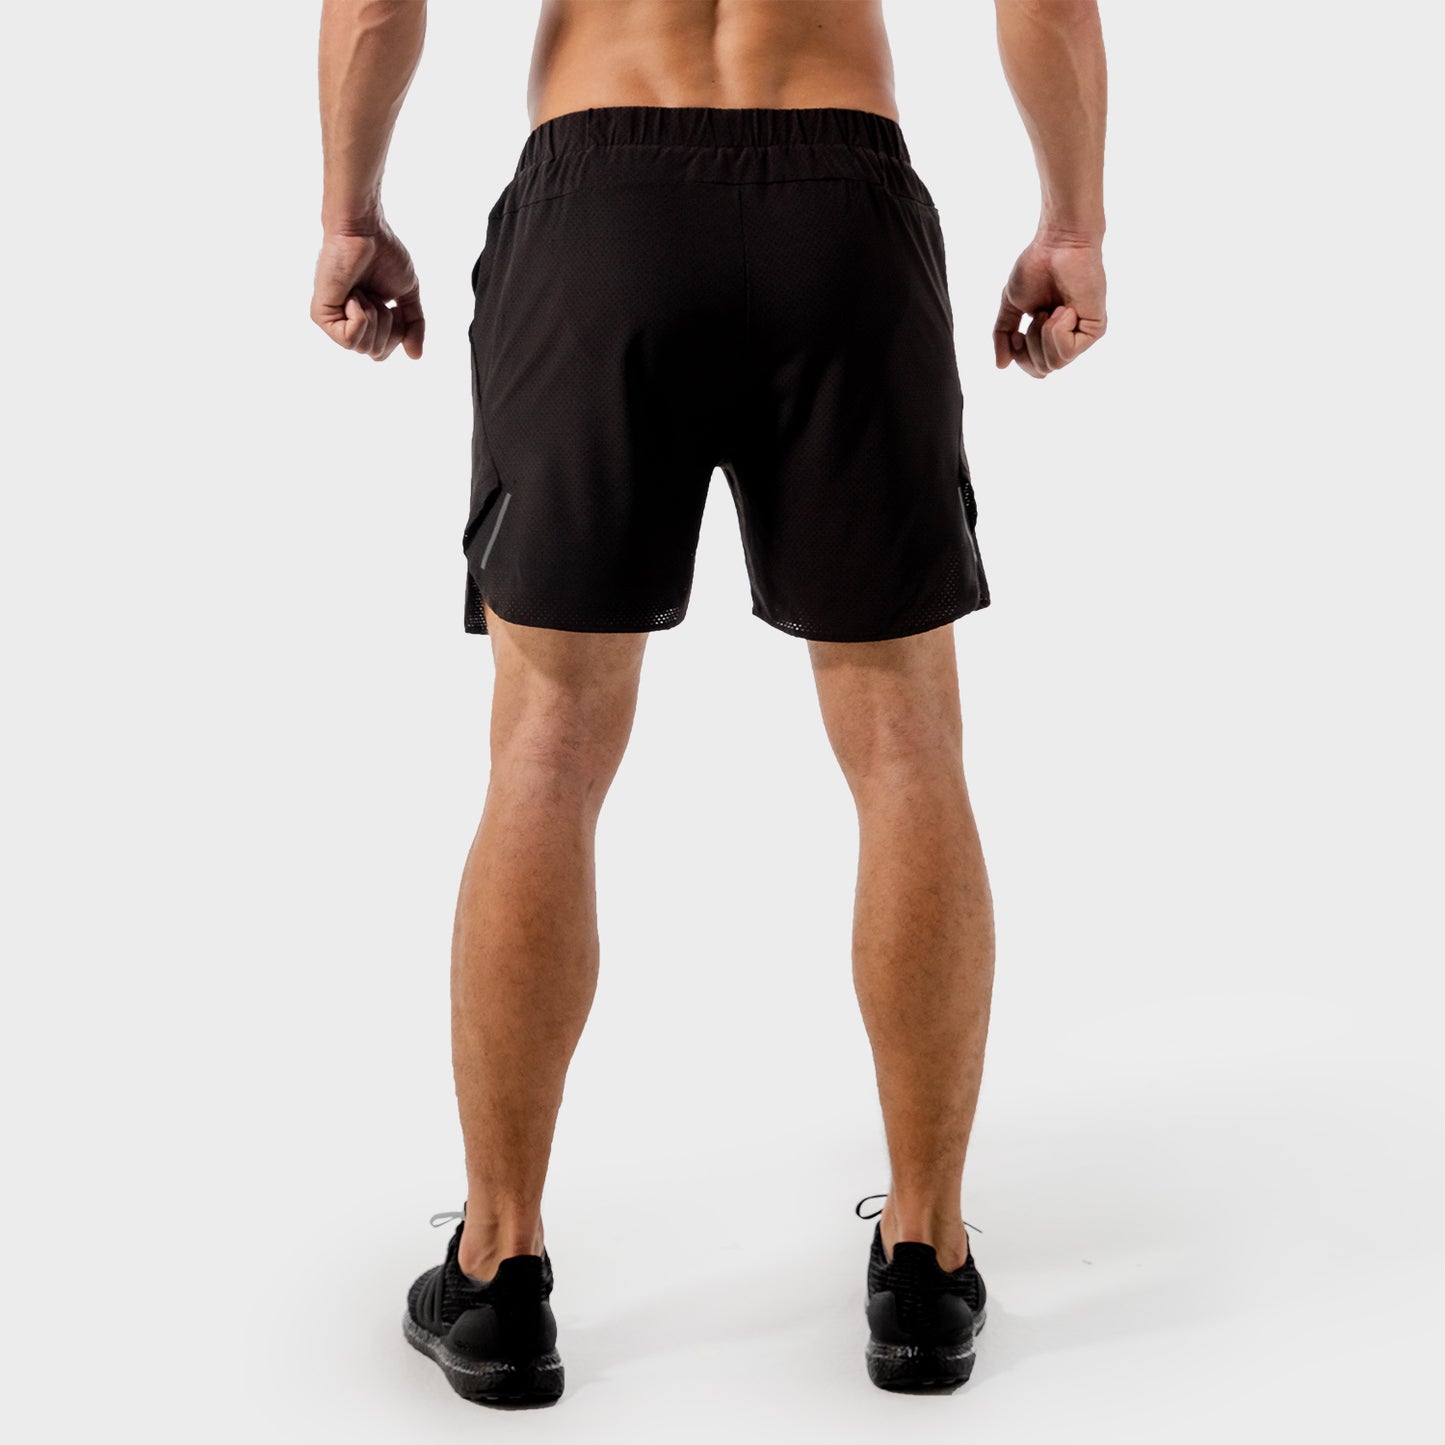 SQUATWOLF-workout-short-for-men-2-in-1-dry-tech-shorts-black-gym-wear